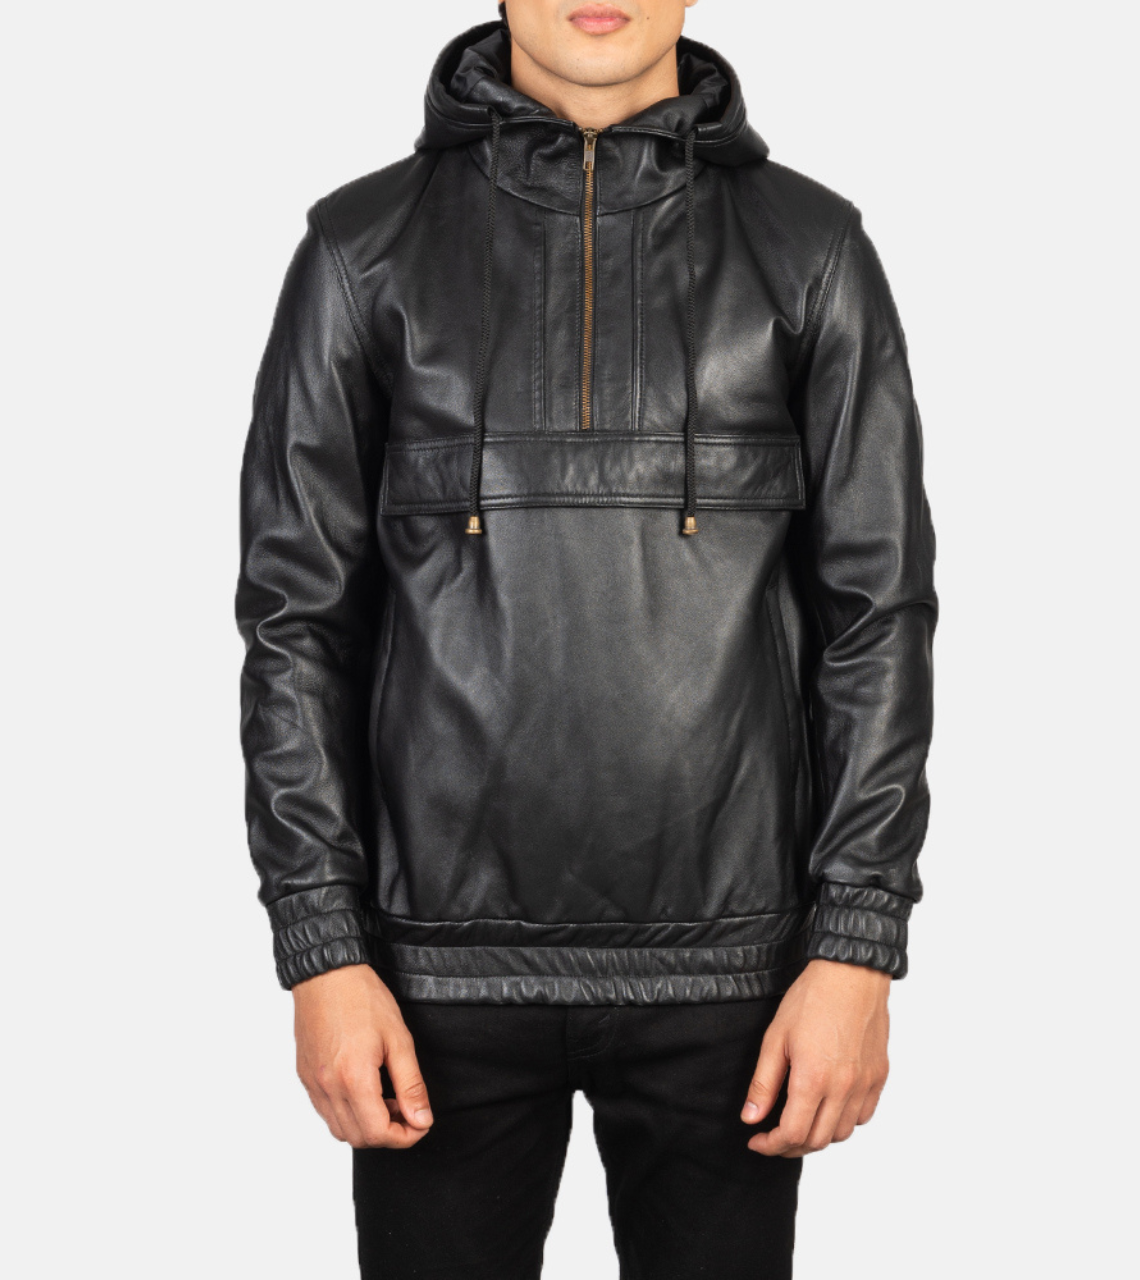 Chasity Black Hooded Leather Pullover Jacket